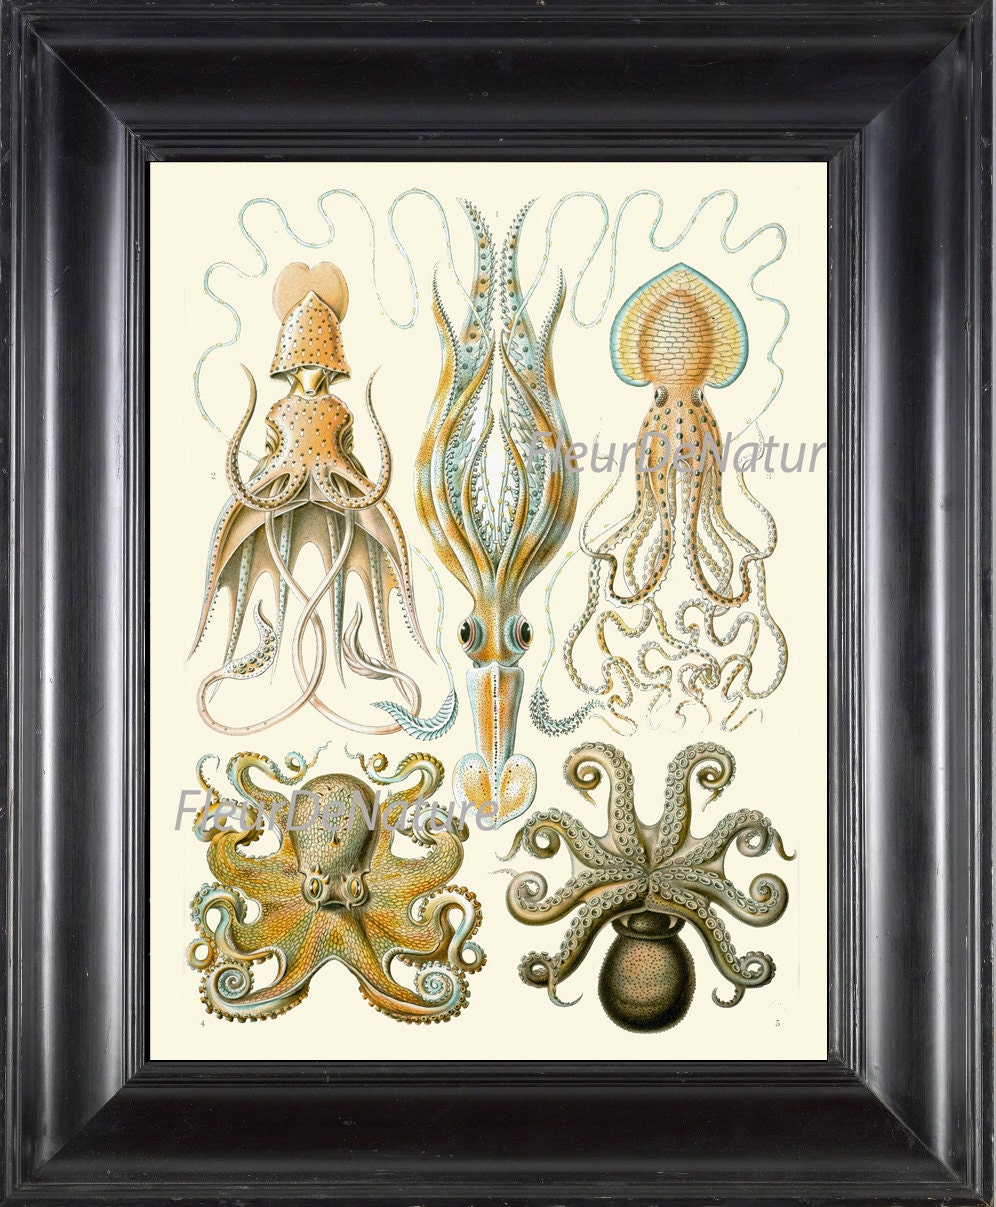 Octopus Squid Print Ernst Haeckel 8x10 Art 42 Antique Beautiful Blue Ivory Sea Ocean Nature Natural Science Chart Seafood Kitchen Wall Decor